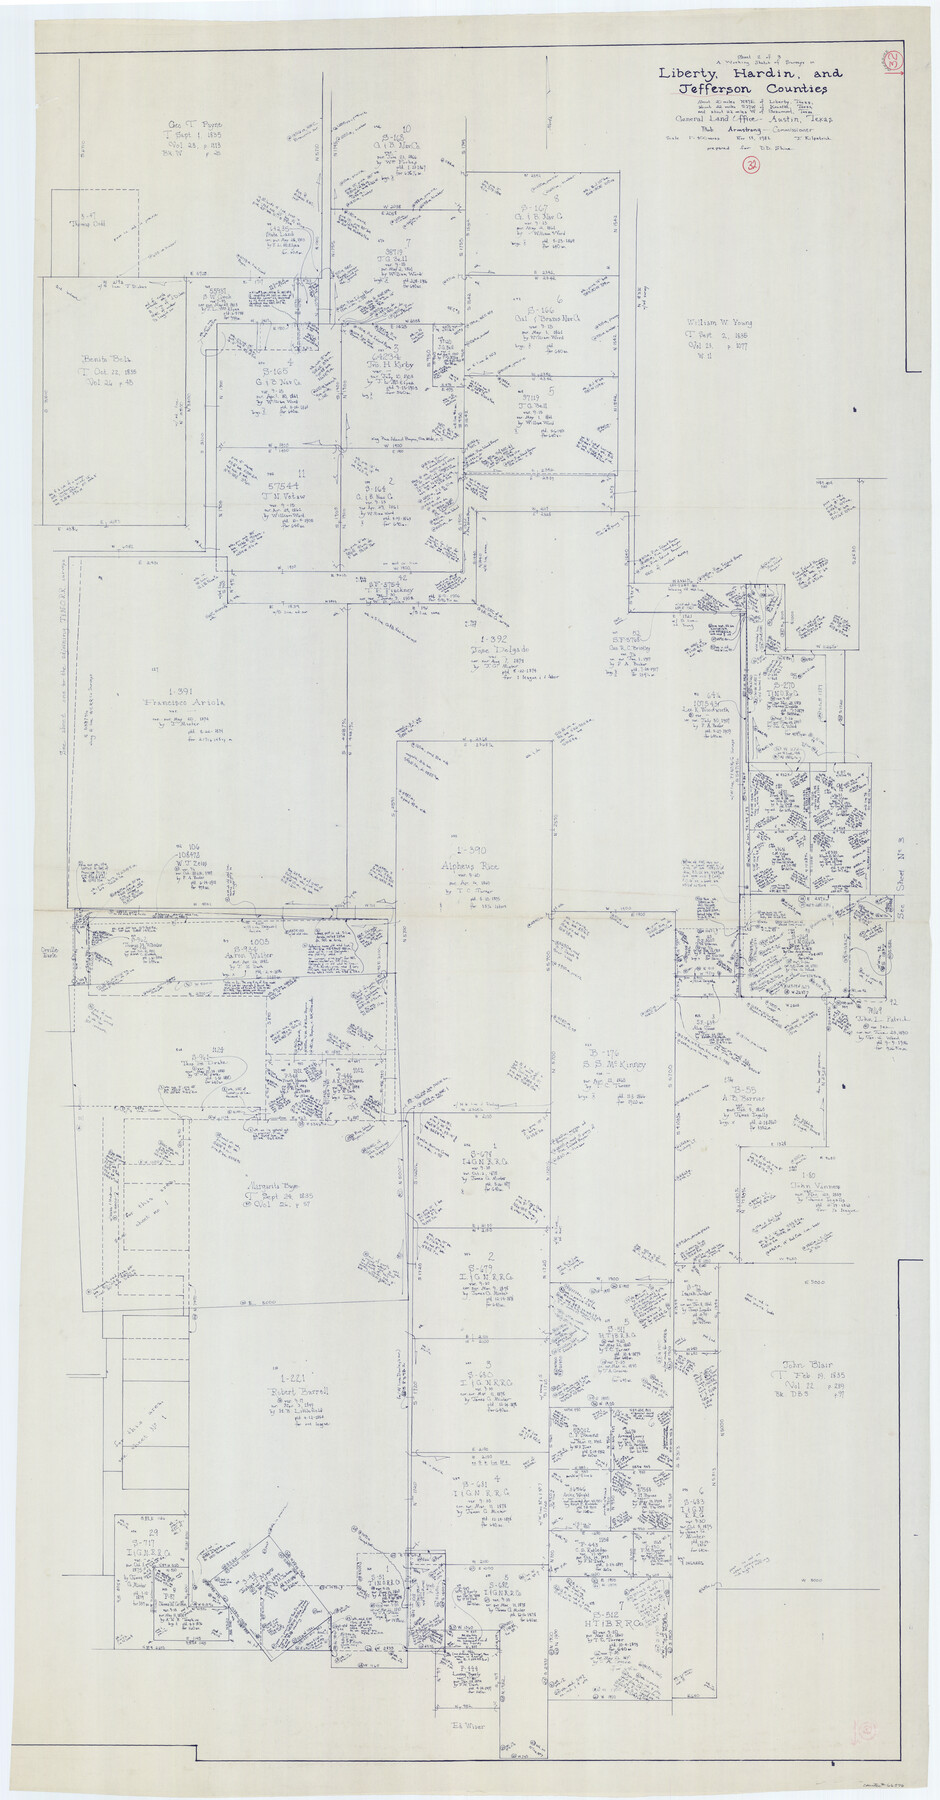 66576, Jefferson County Working Sketch 32, General Map Collection